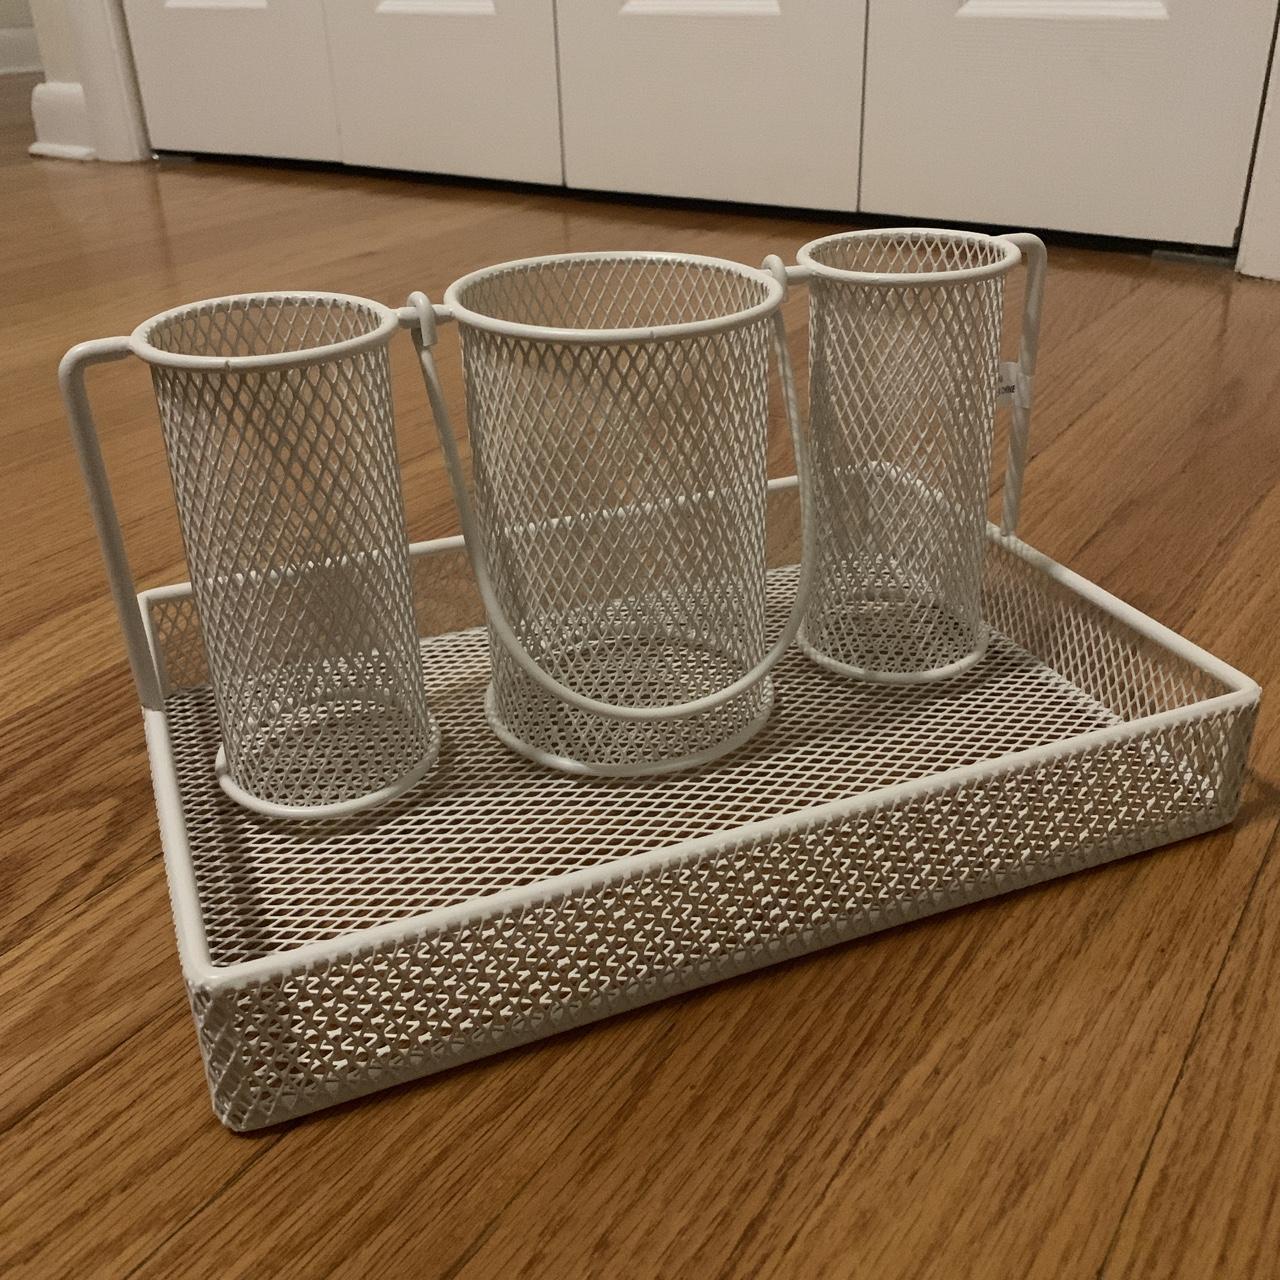 Pb Teen Wire Hair Caddy. Brand new, still in the